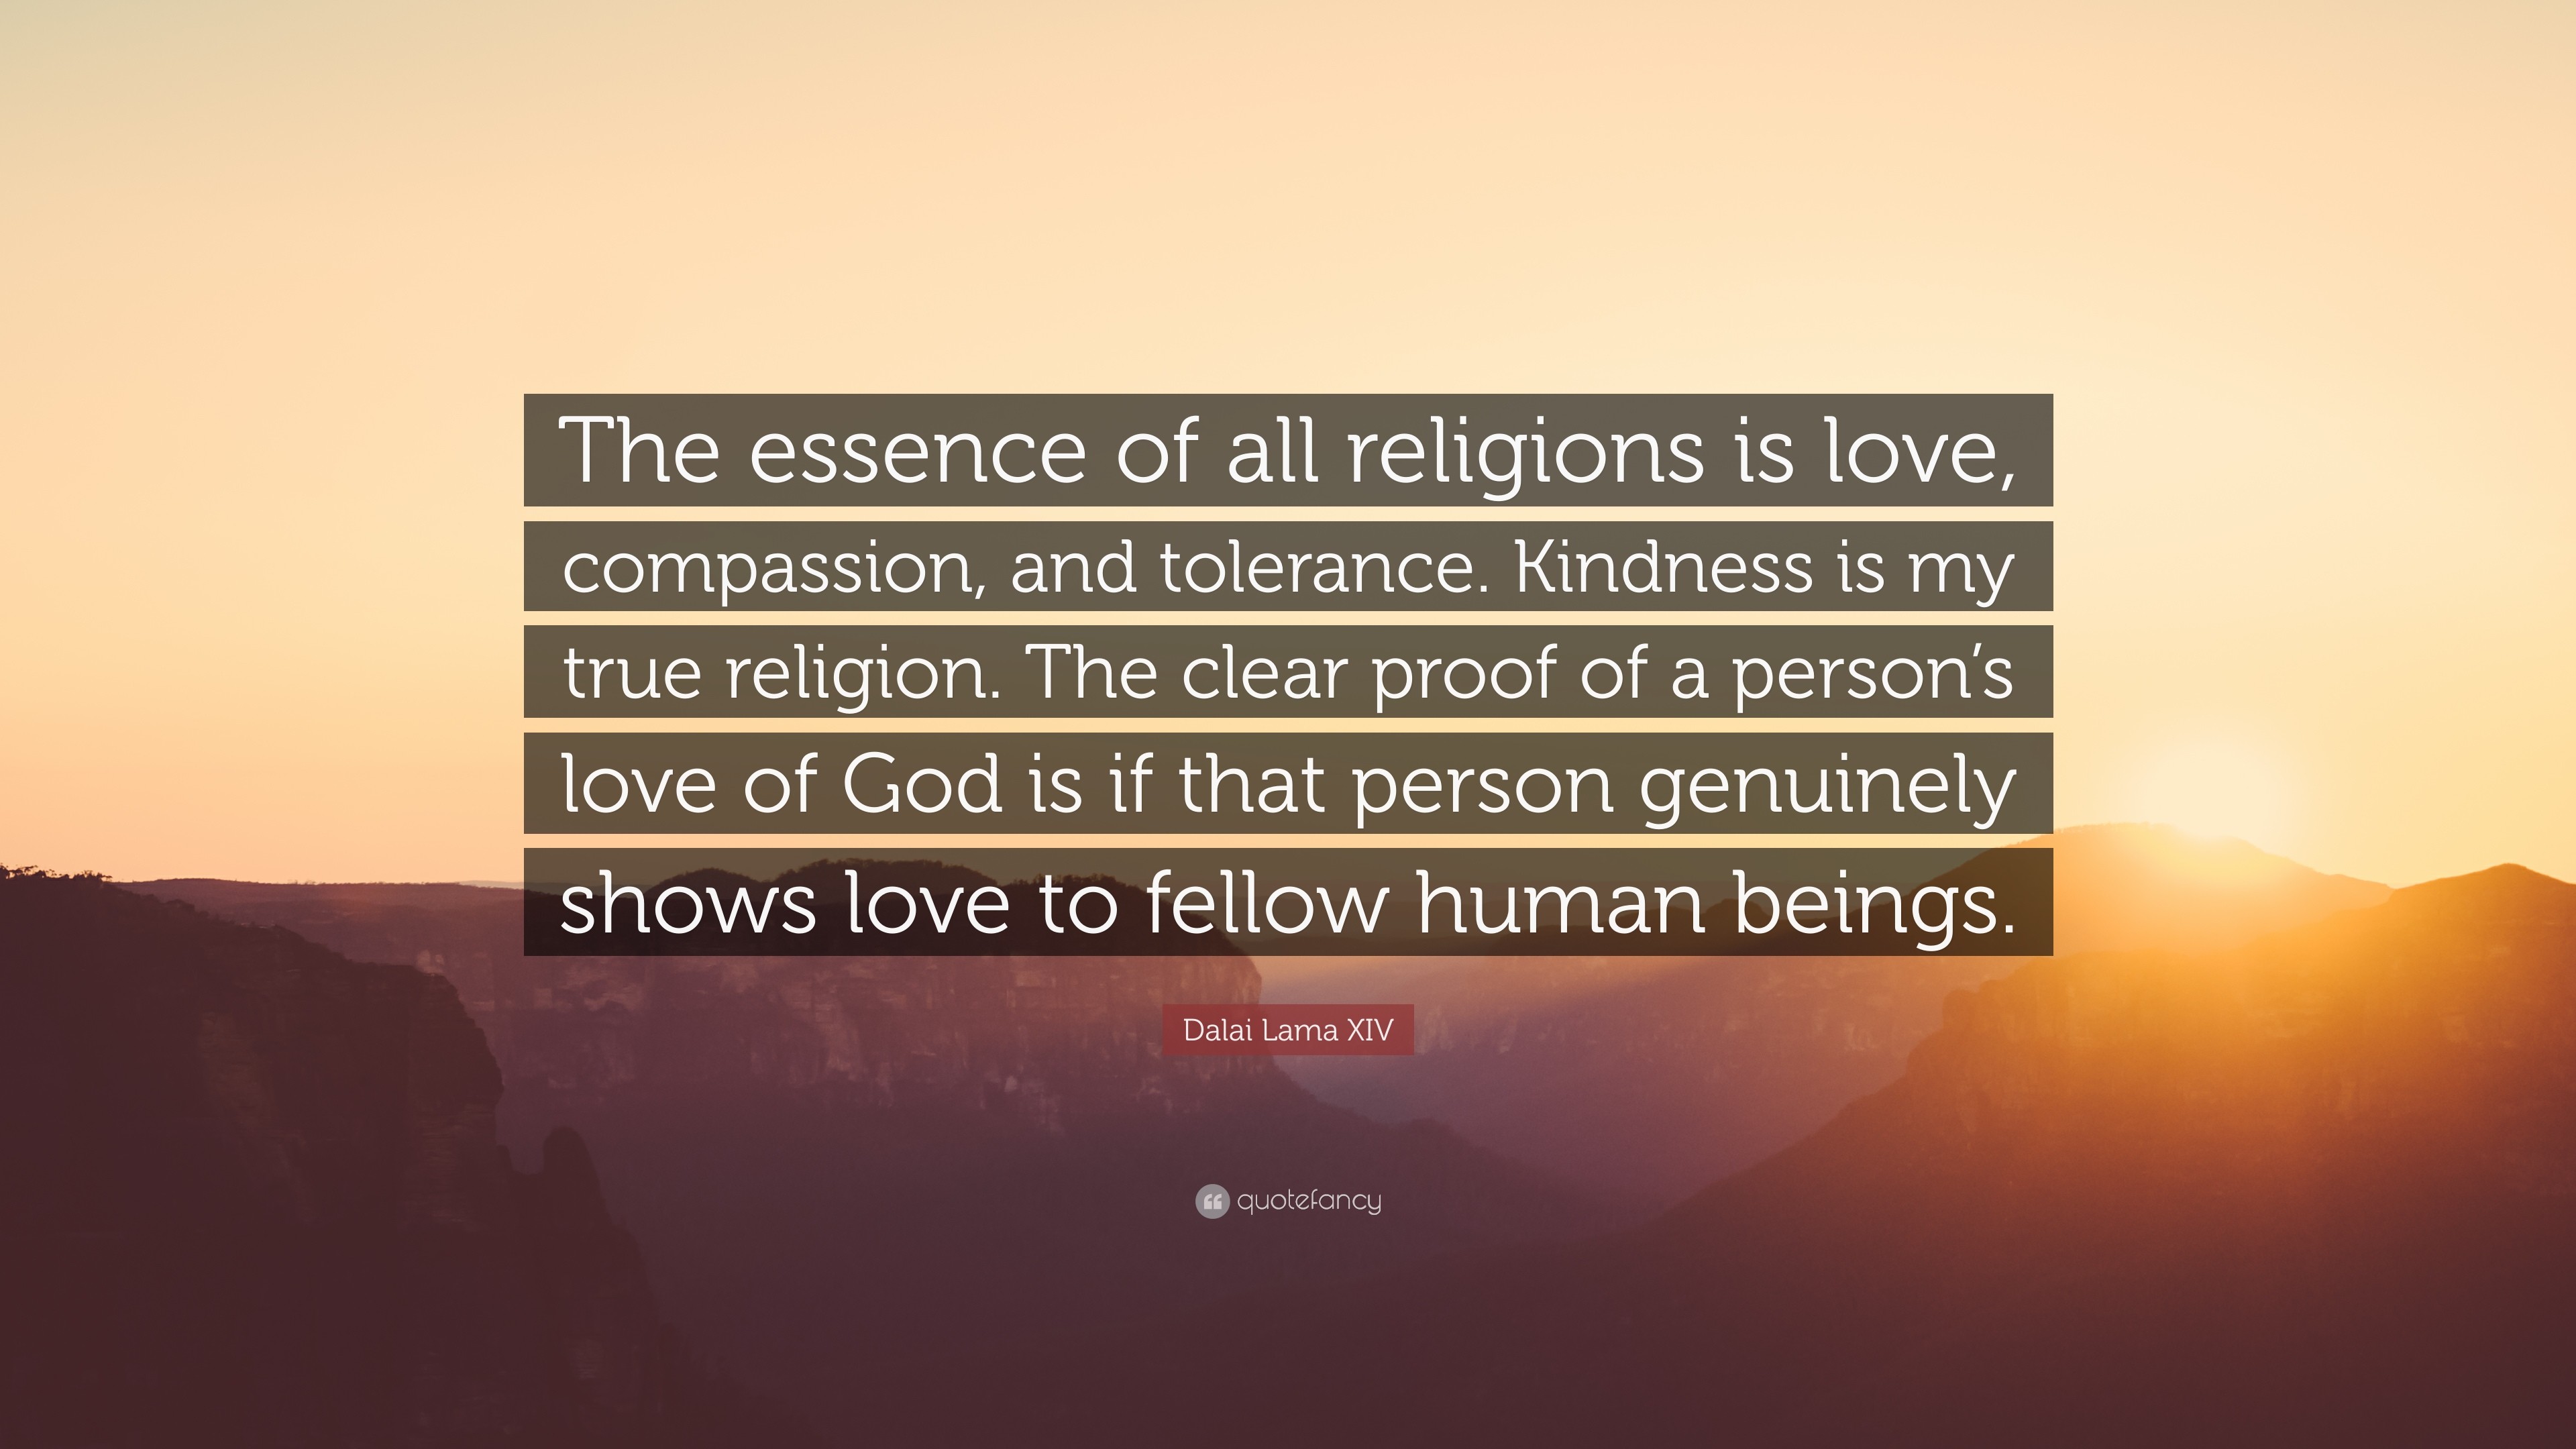 3840x2160 Dalai Lama XIV Quote: “The essence of all religions is love, compassion,